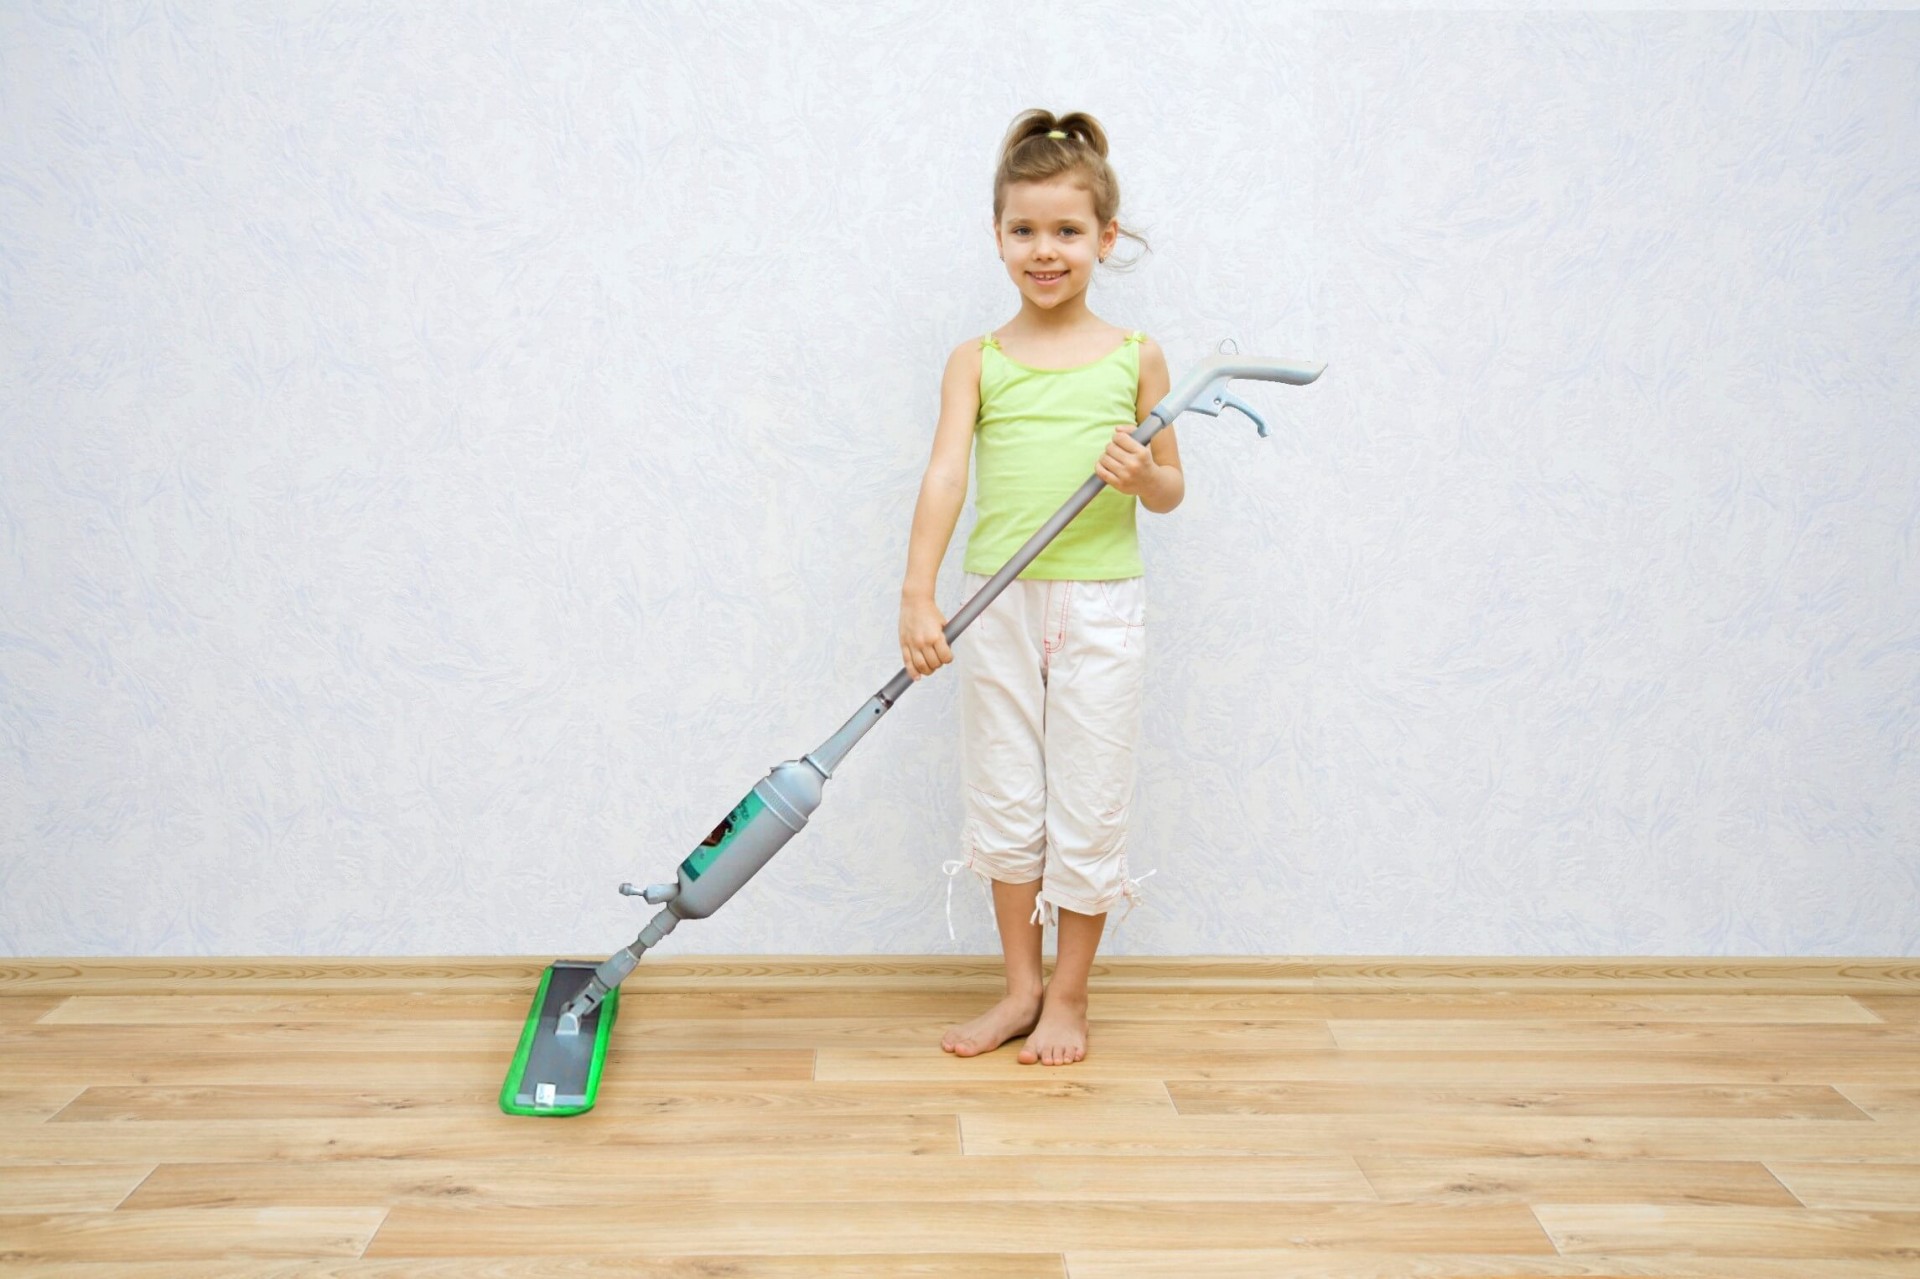 hardwood floors supplies with regular cleaning